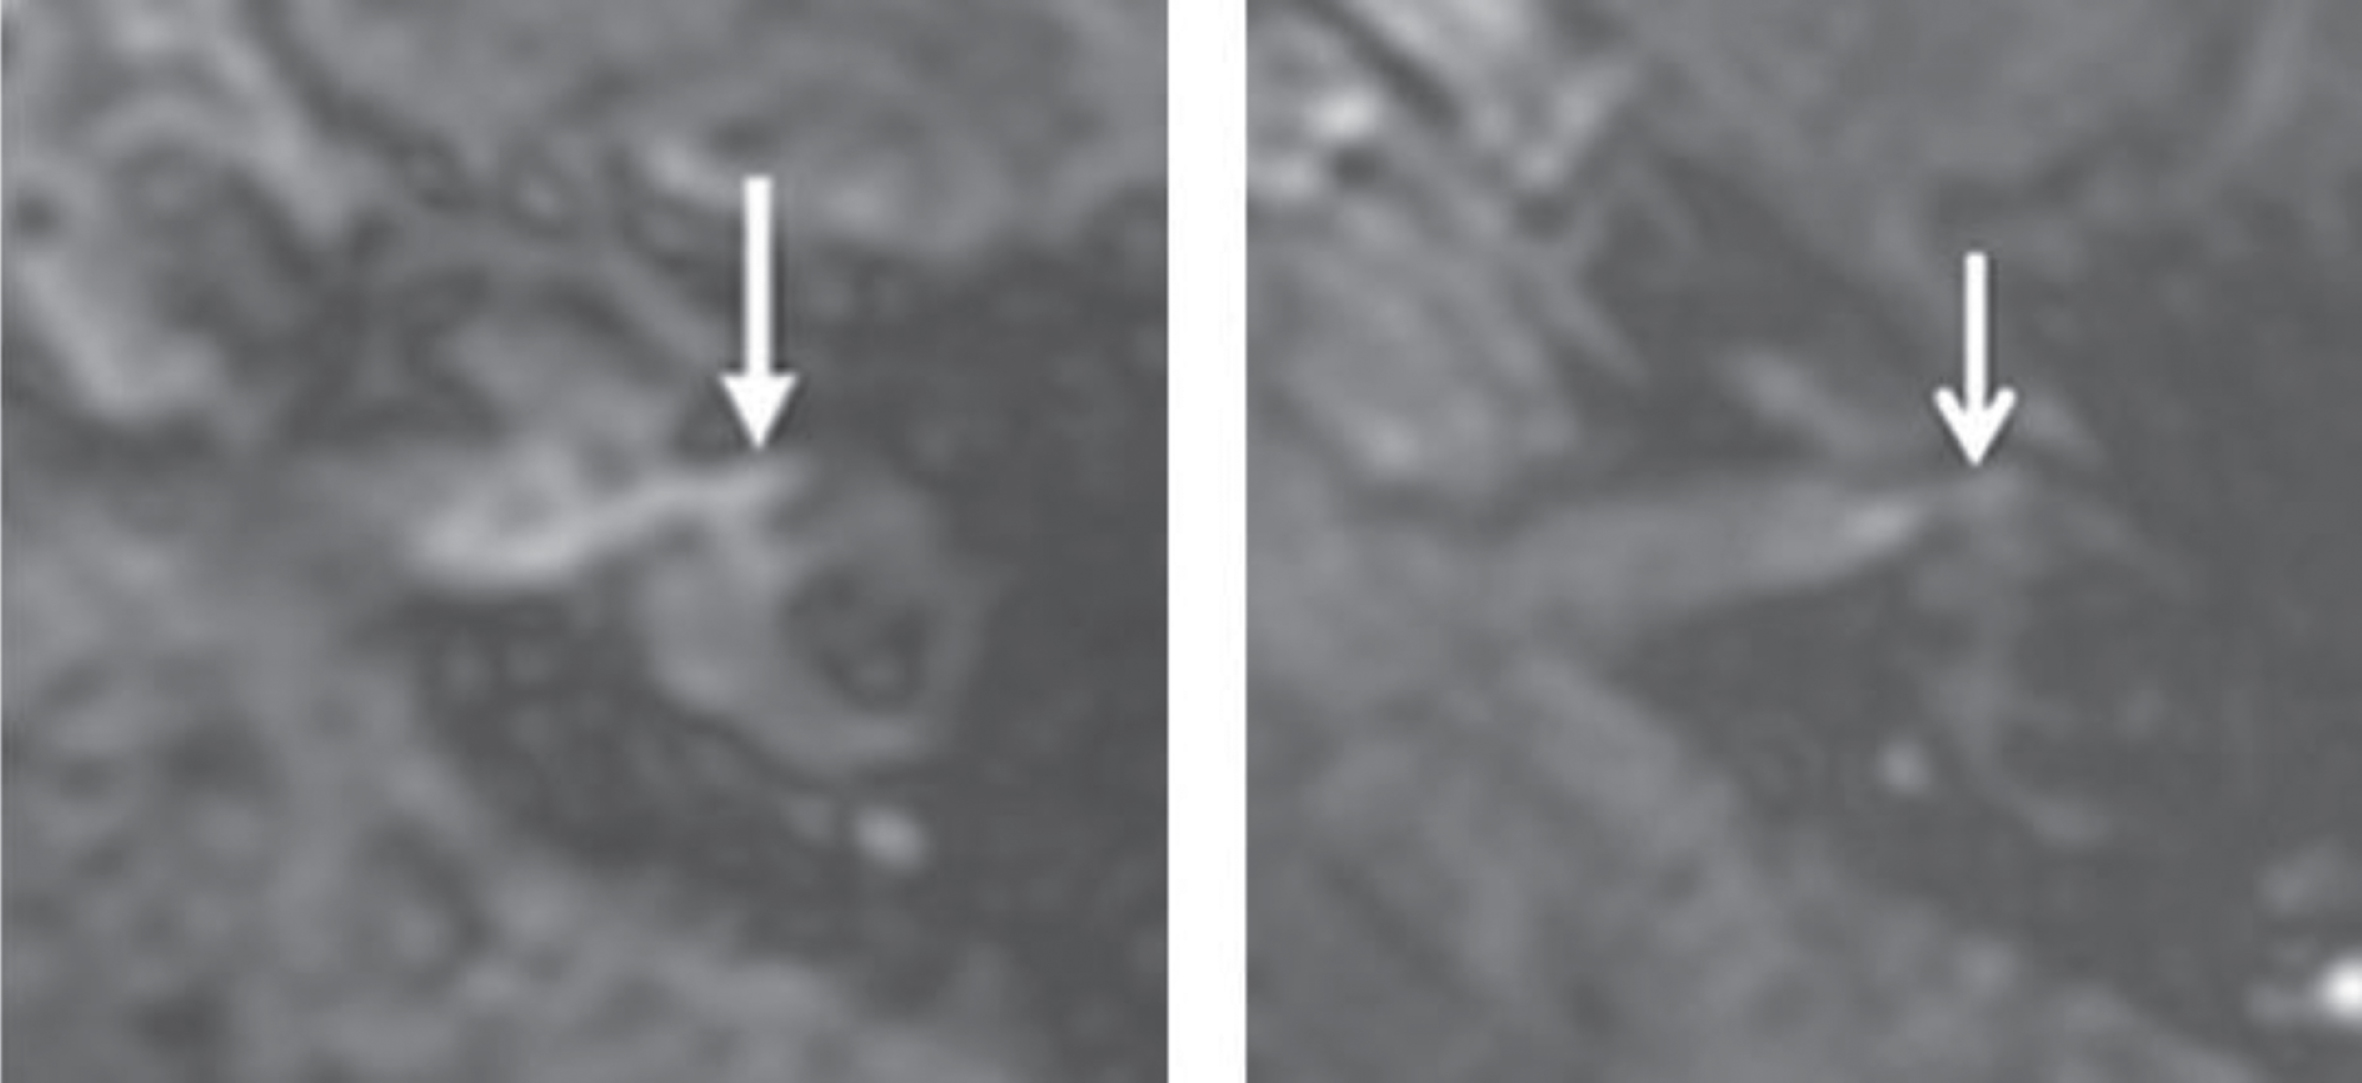 A)Axial contrast-enhanced (∼1h) FLAIR sequence showing an enhancing superior vestibular nerve (> 71.5 units, arrow) in a patient with an acute vestibular neuritis. B) Normal enhancement of the superior vestibular nerve (arrow) in another patient.